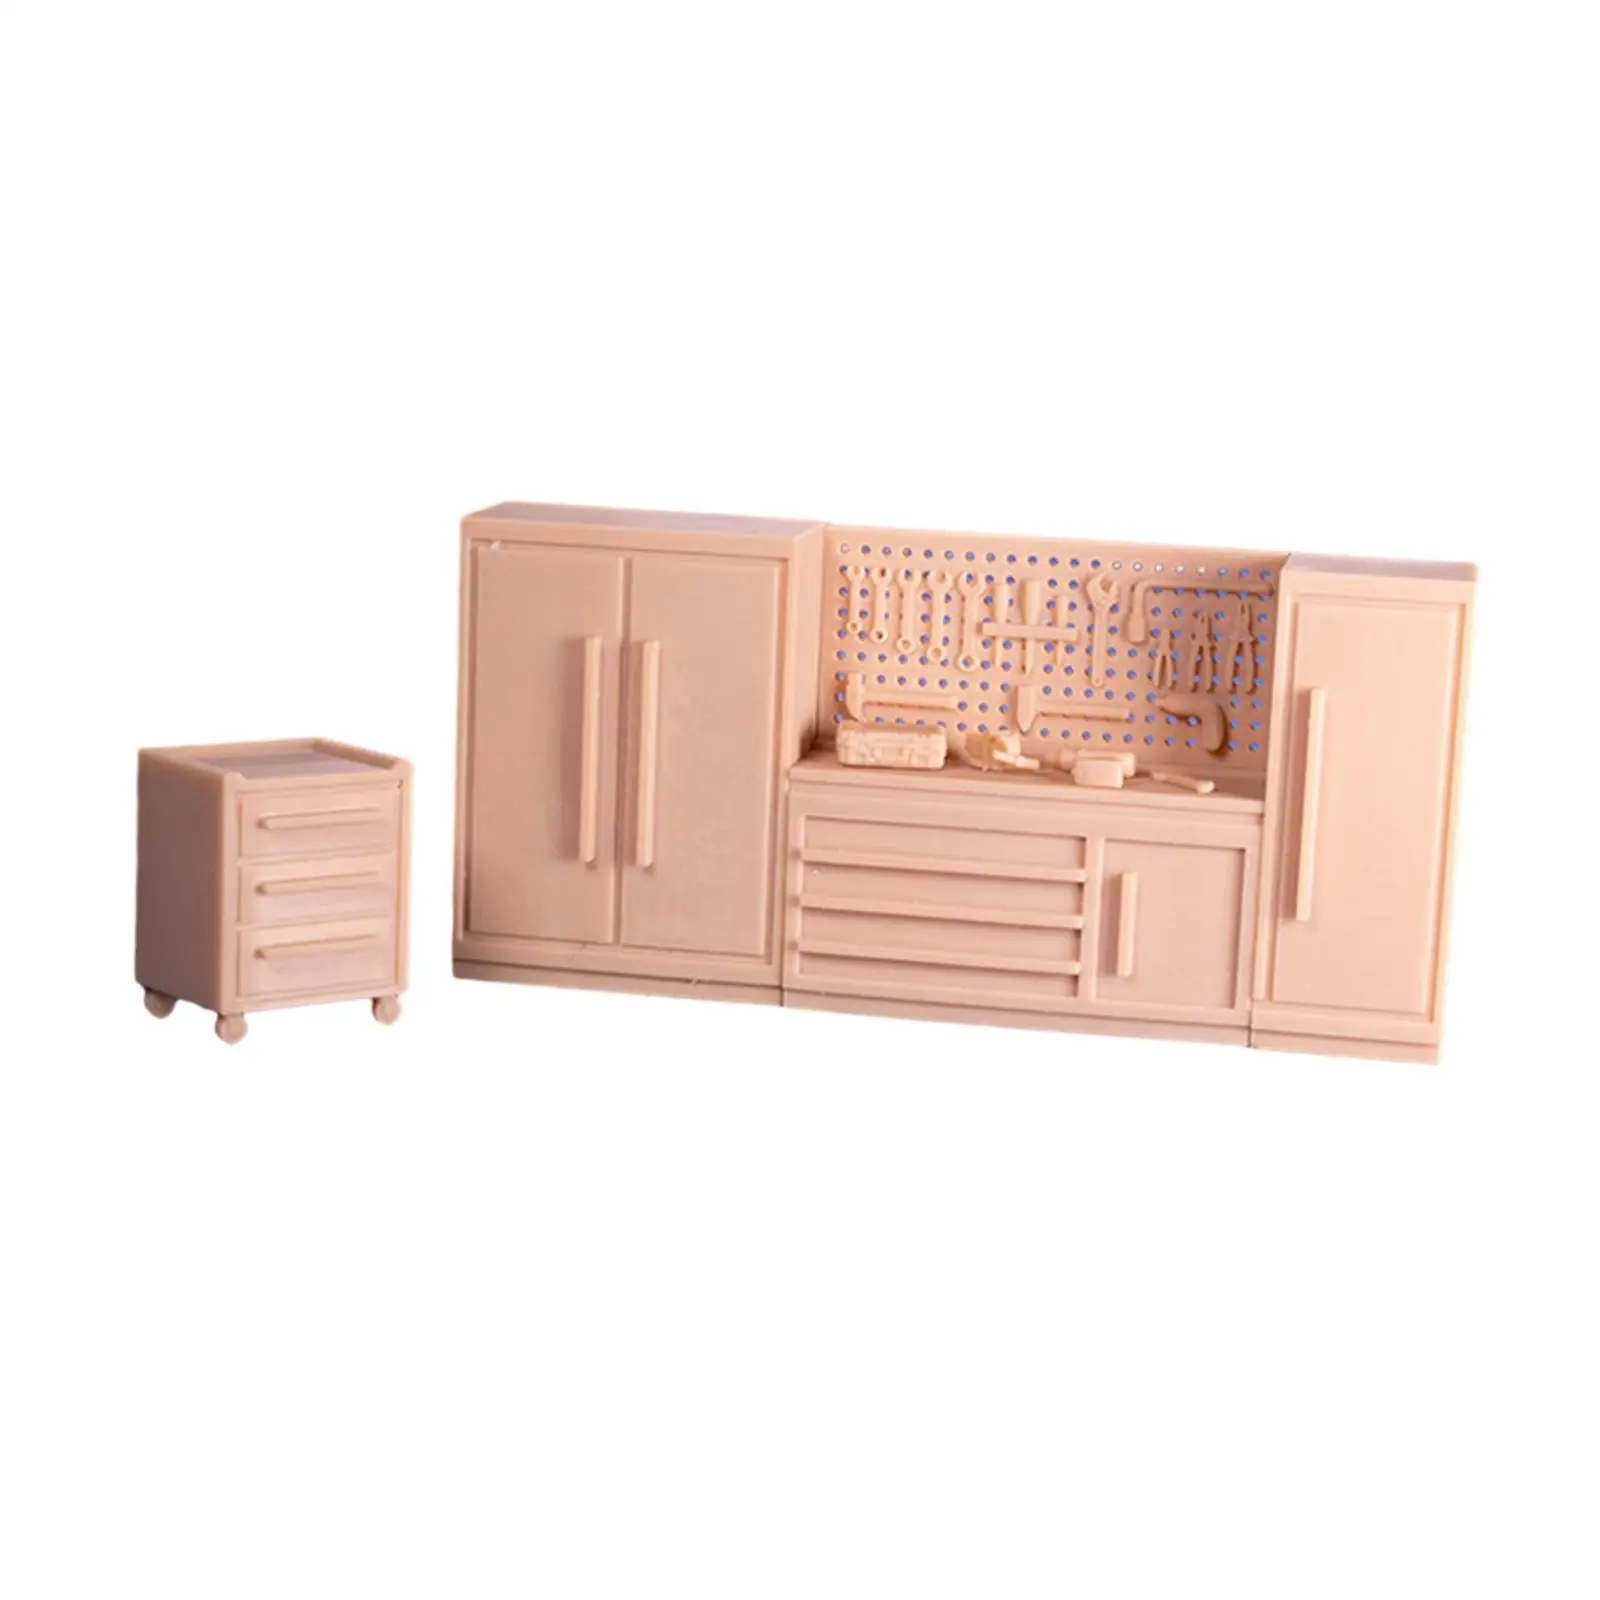 1/64 Cabinet Auto Repair Tool, Simulation Model Scene Accessories, Resin Tiny Model for DIY Sand Table, Garage Layout Model